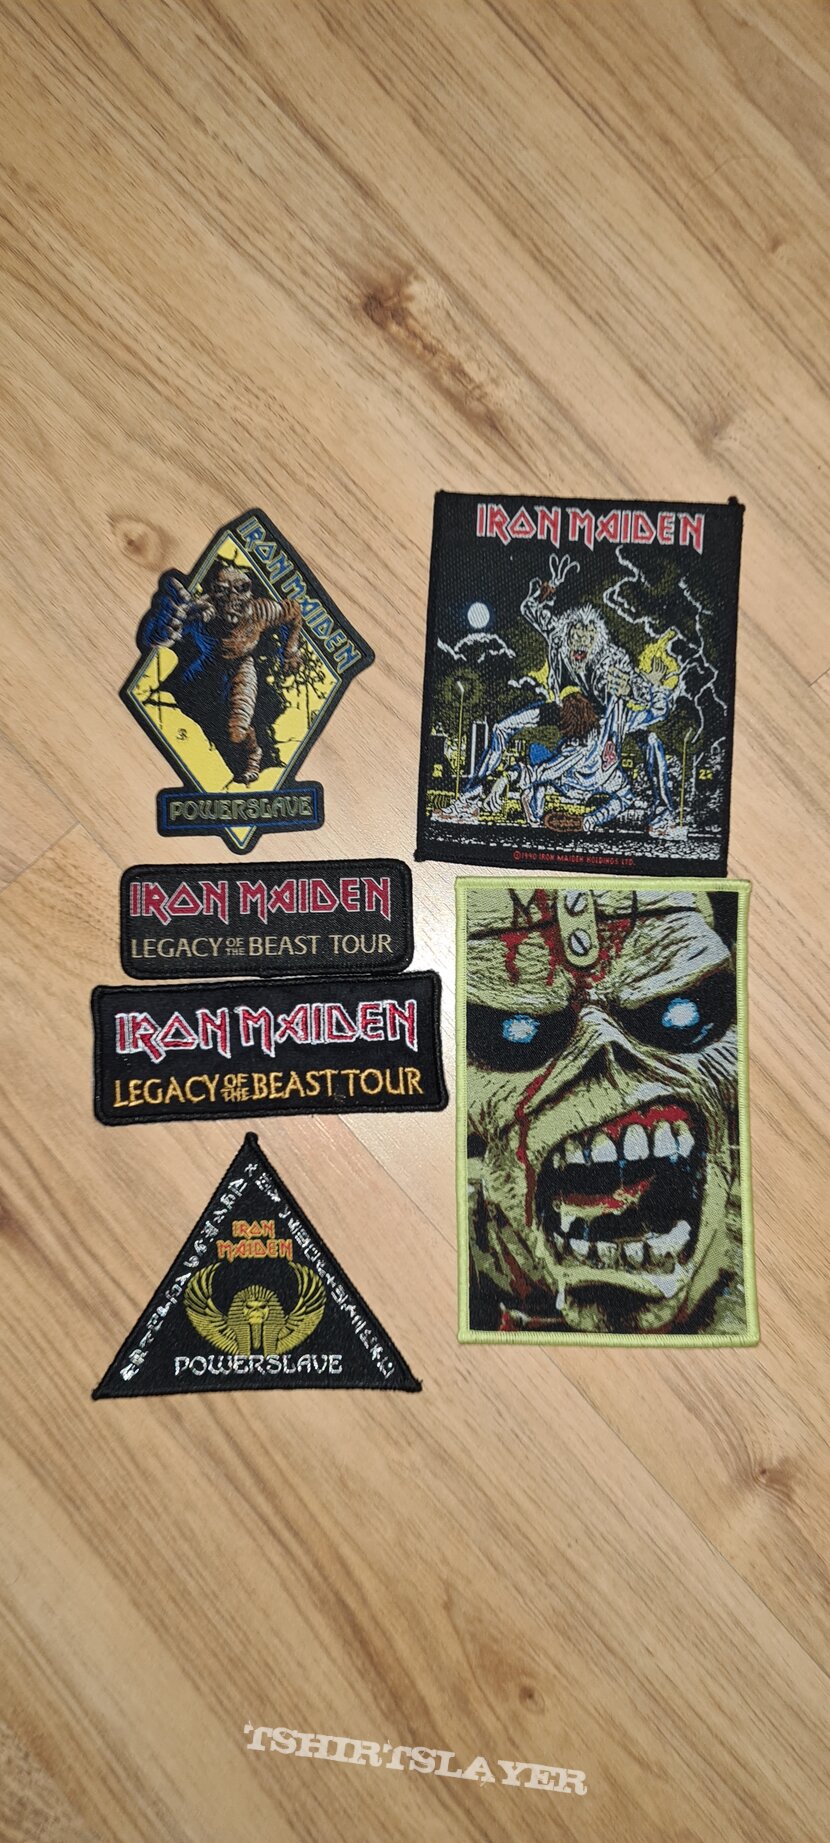 Iron Maiden patches sold